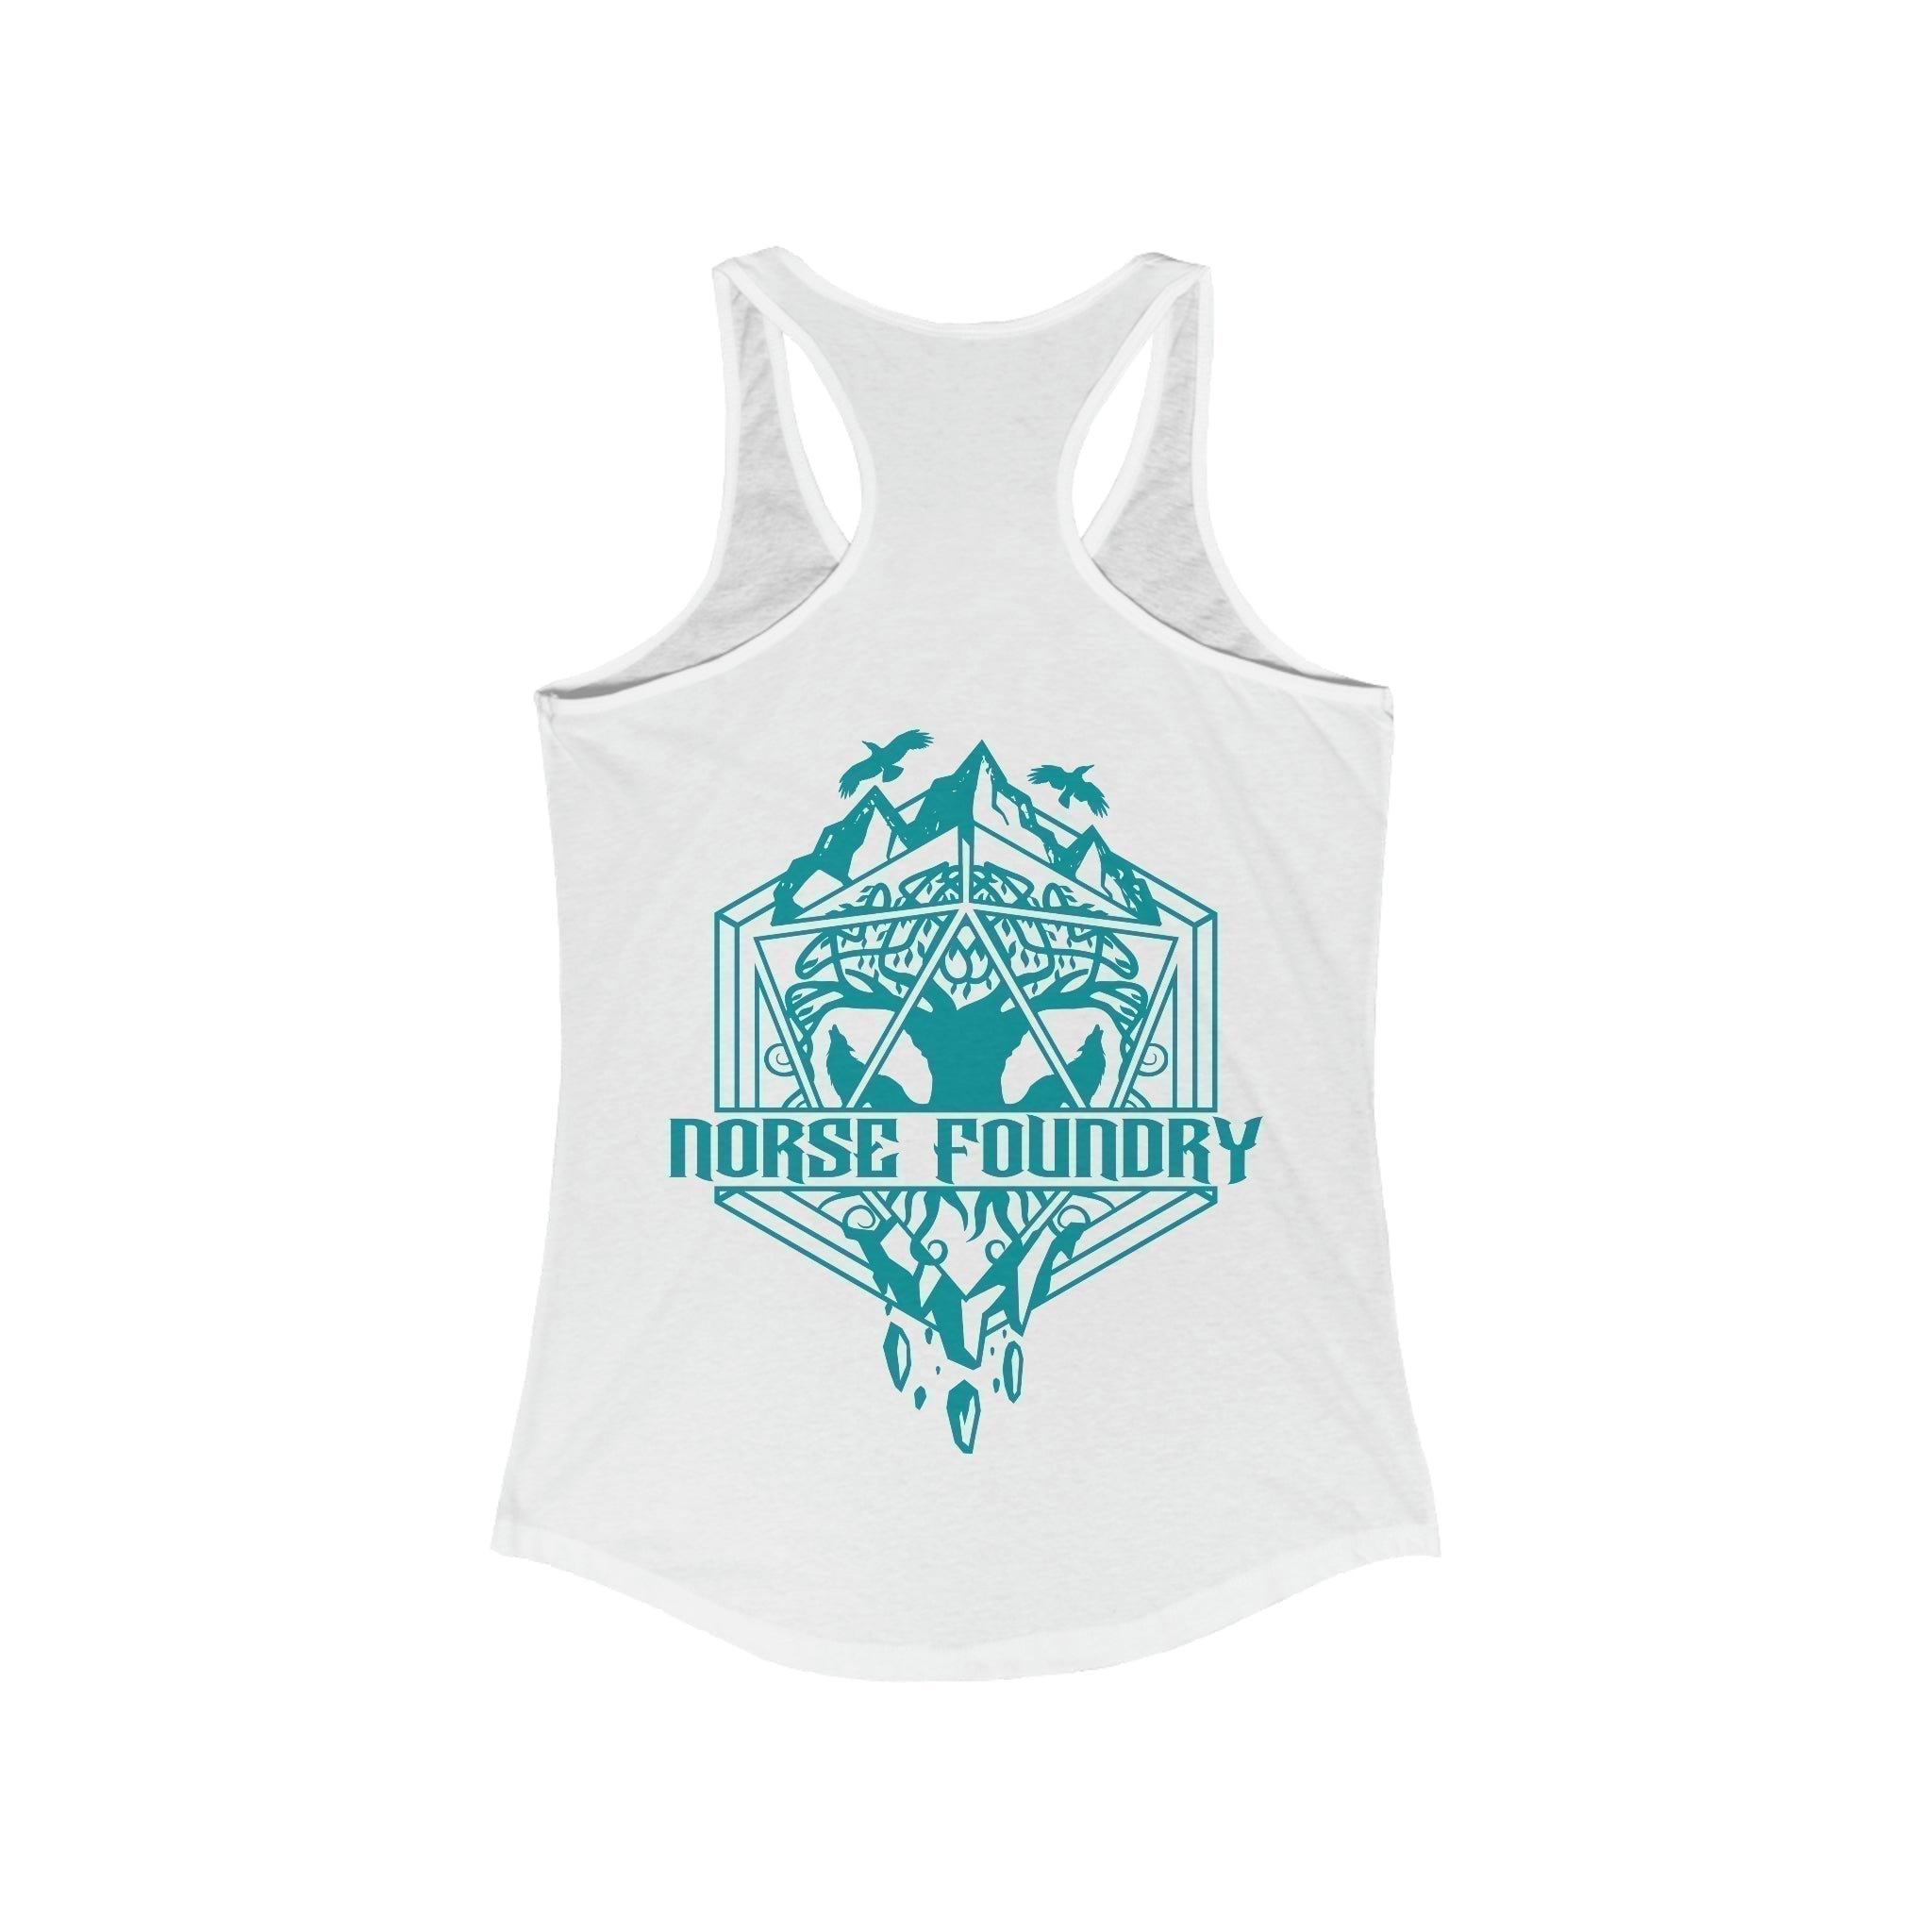 Roll for Adventure - Norse Foundry Women's Tank Top - 21877327129447835315